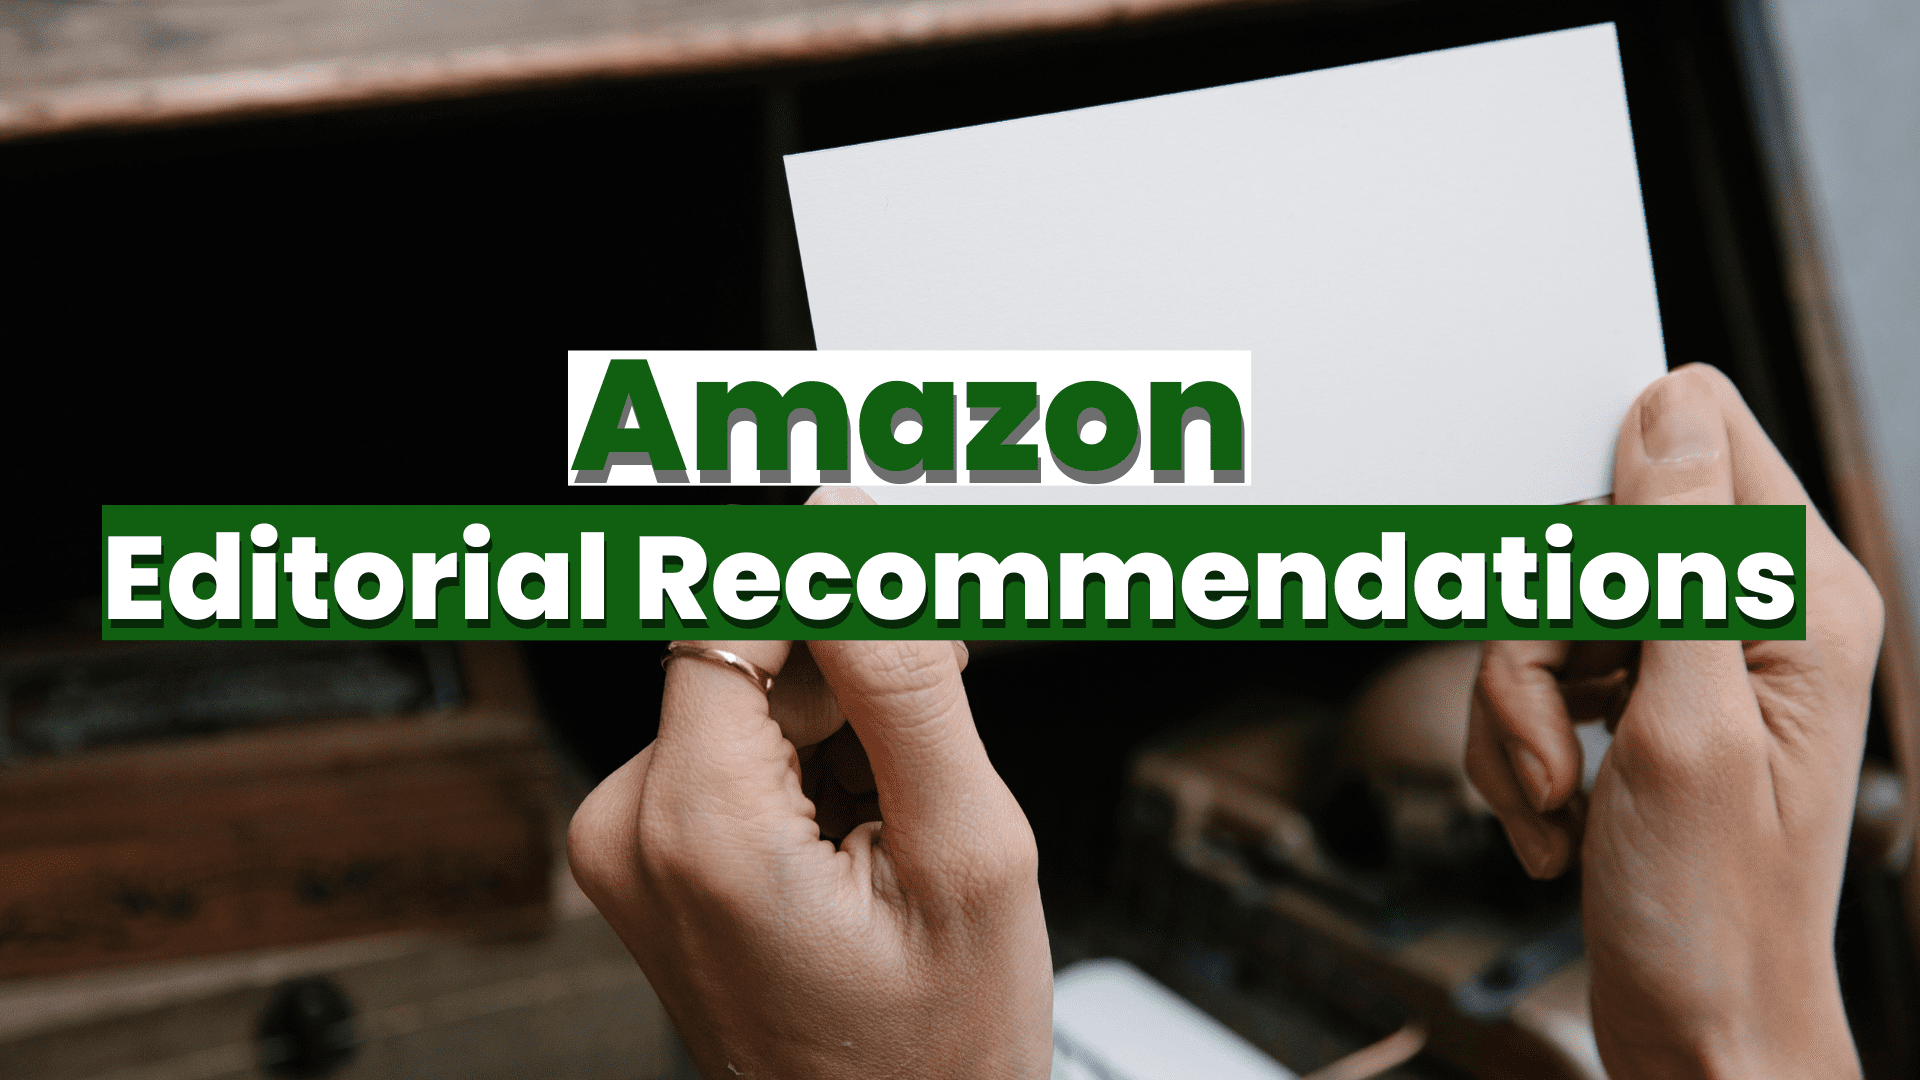 Amazon Editorial Recommendations